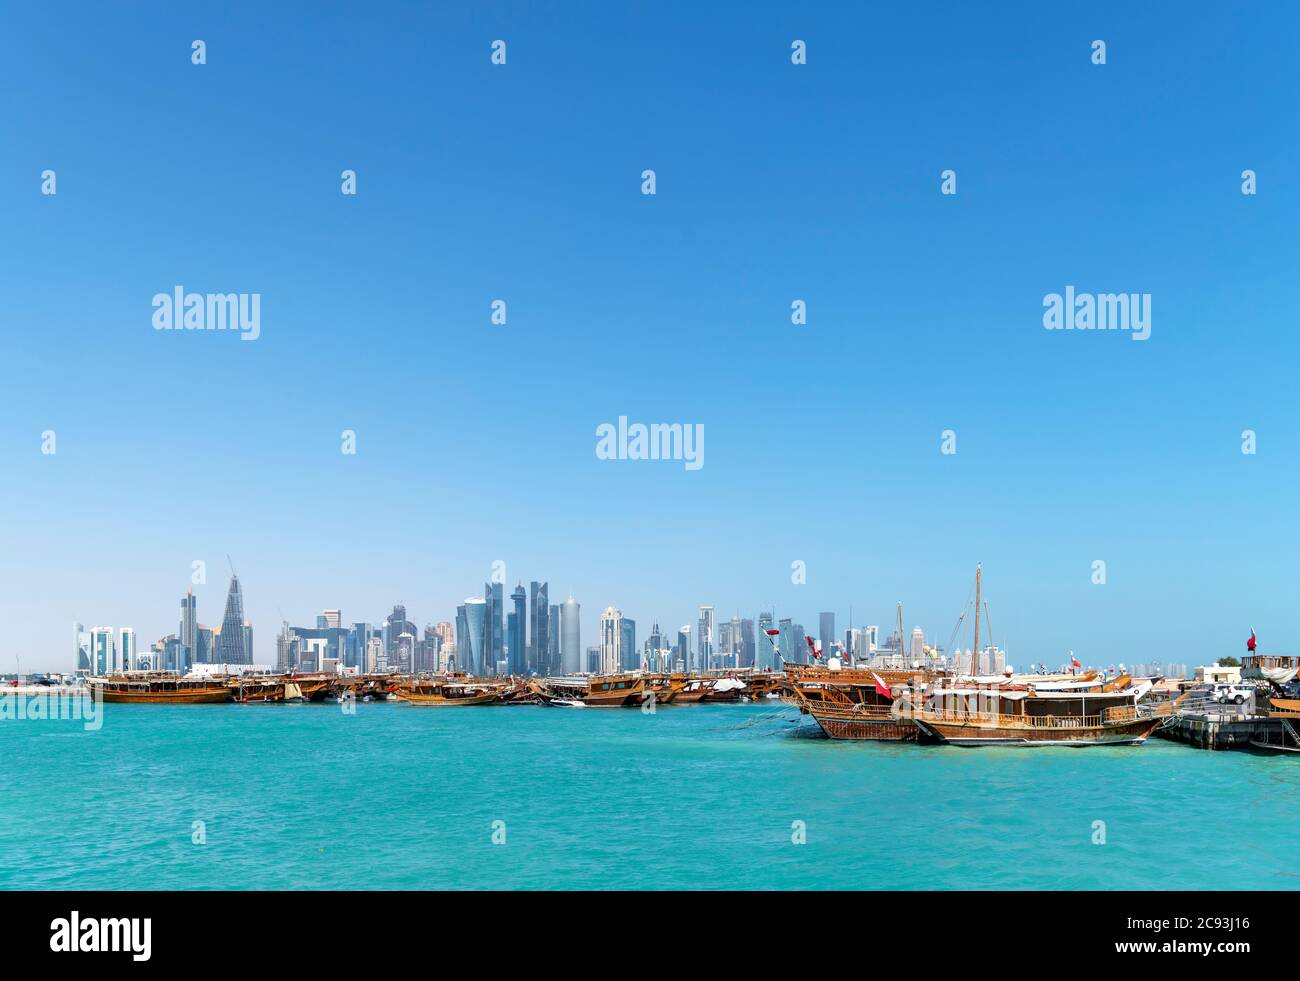 Dhows in the Dhow Harbour with the West Bay Central Business District skyline behind, Doha, Qatar, Middle East Stock Photo